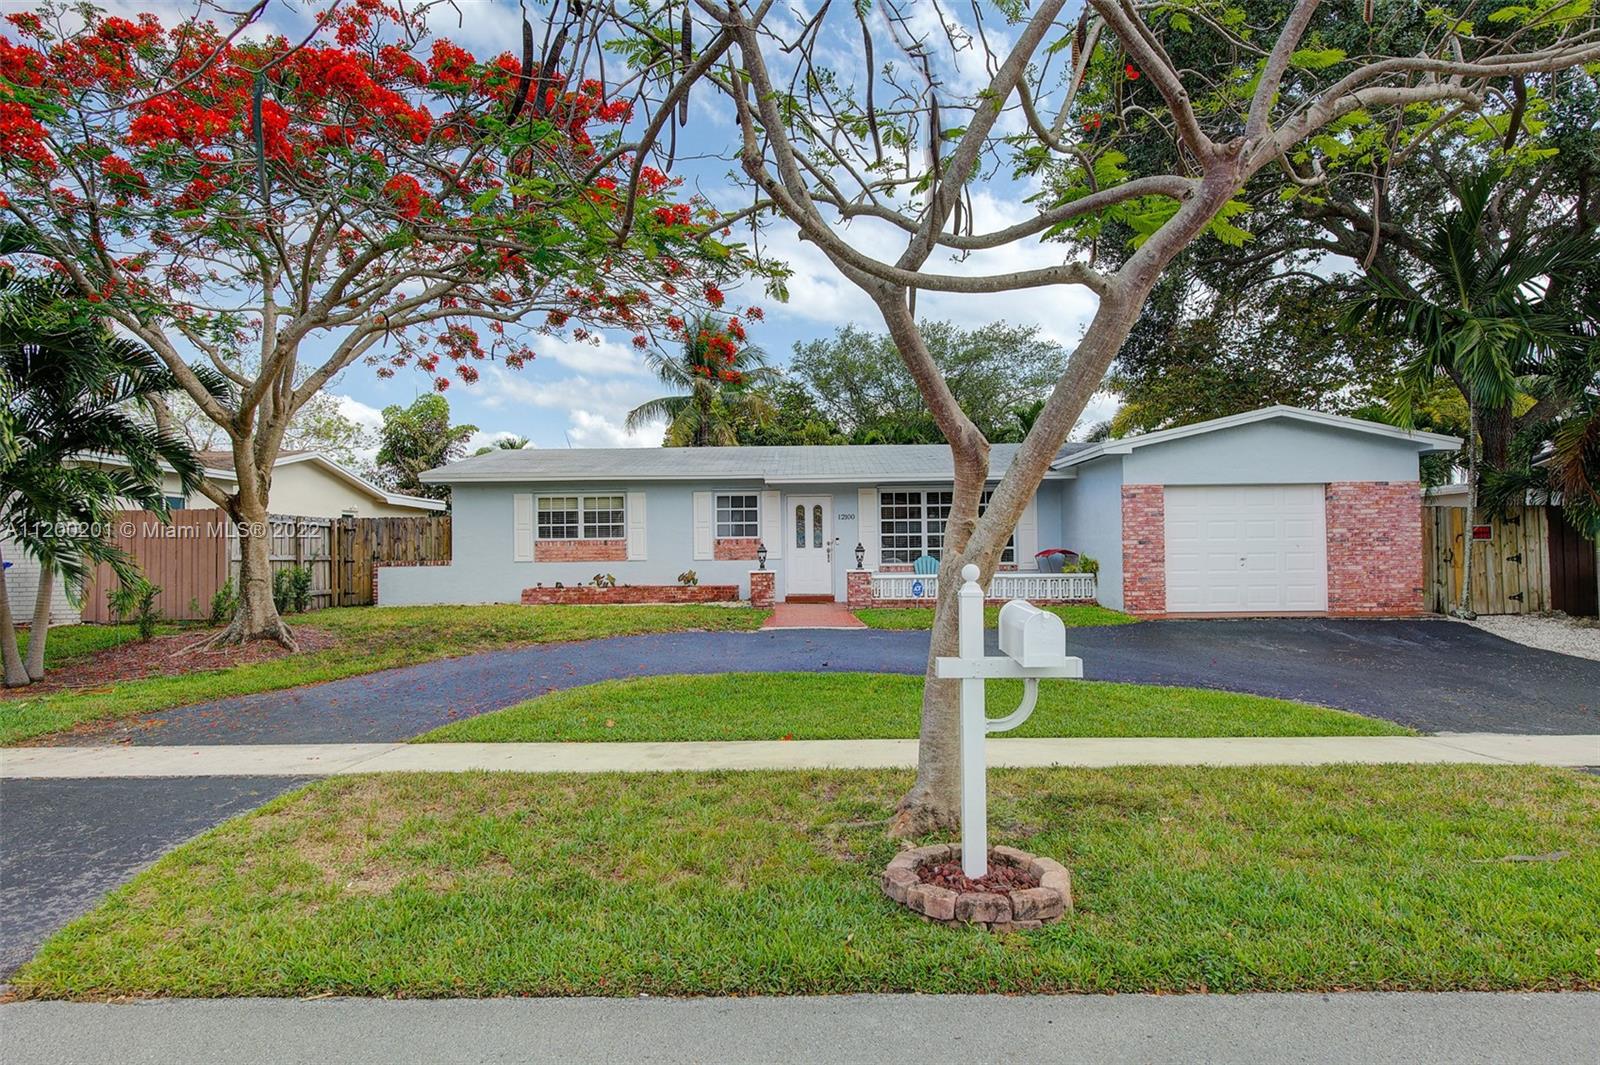 Ready for new owners in the oh-so desirable Pembroke Lakes! Tons of natural light throughout the home with many upgrades including kitchen and bathroom.  Home has three bedrooms and two full baths, with garage currently being used as a fourth bedroom.  Highlights include gas water heater, gas dryer and roof under five years old.  Awesome backyard features covered patio and ample room for a pool.  You can have side access to backyard for an  with an easy adjustment. No HOA! Home is move-in ready!